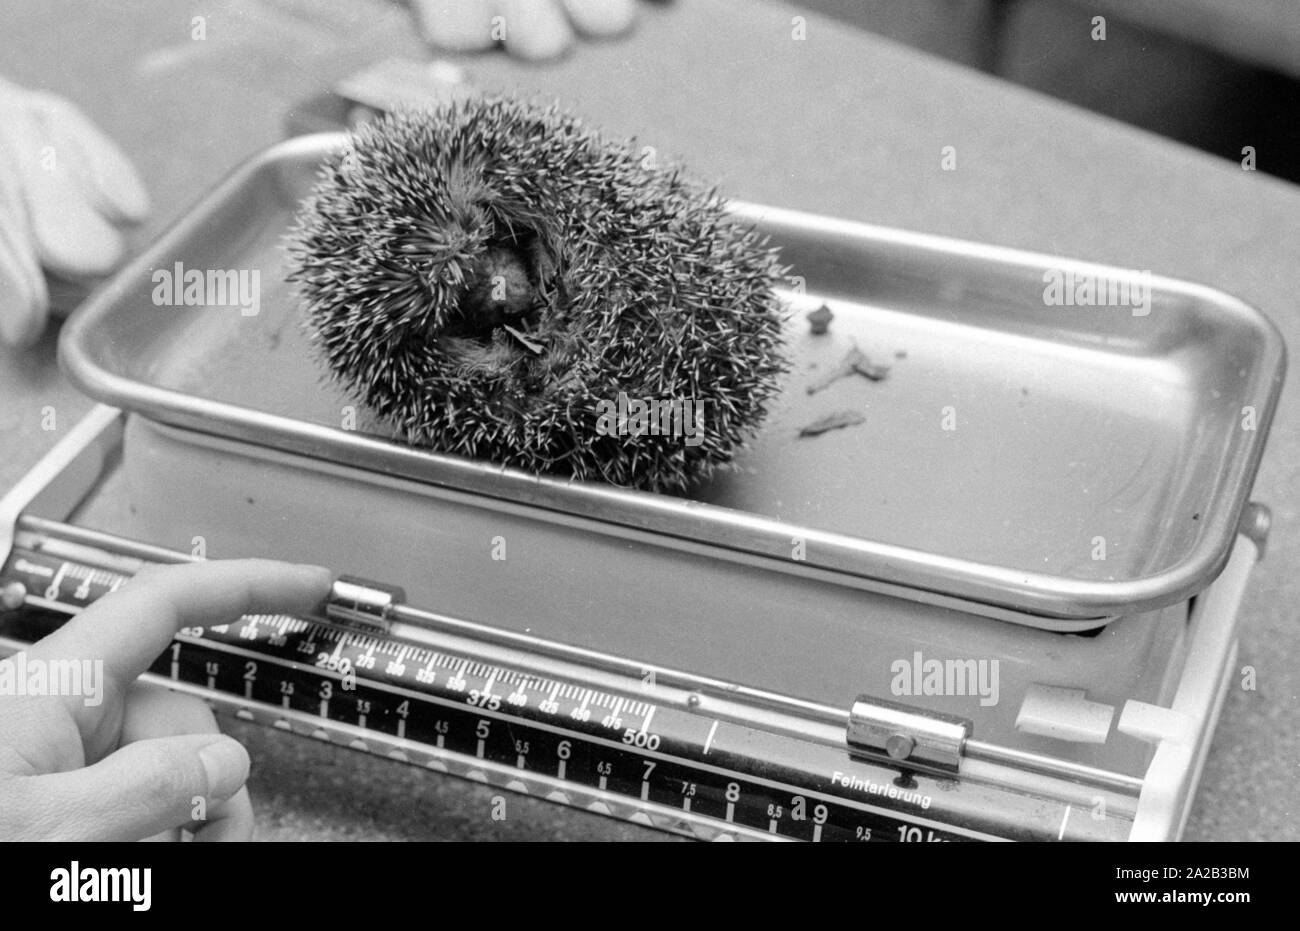 The employees of a hedgehog rescue center take care of newly found animals. The veterinarians take care of the health of the animals and with the center provide them a safe place for the wintering. The hedgehogs are examined and weighed. Stock Photo